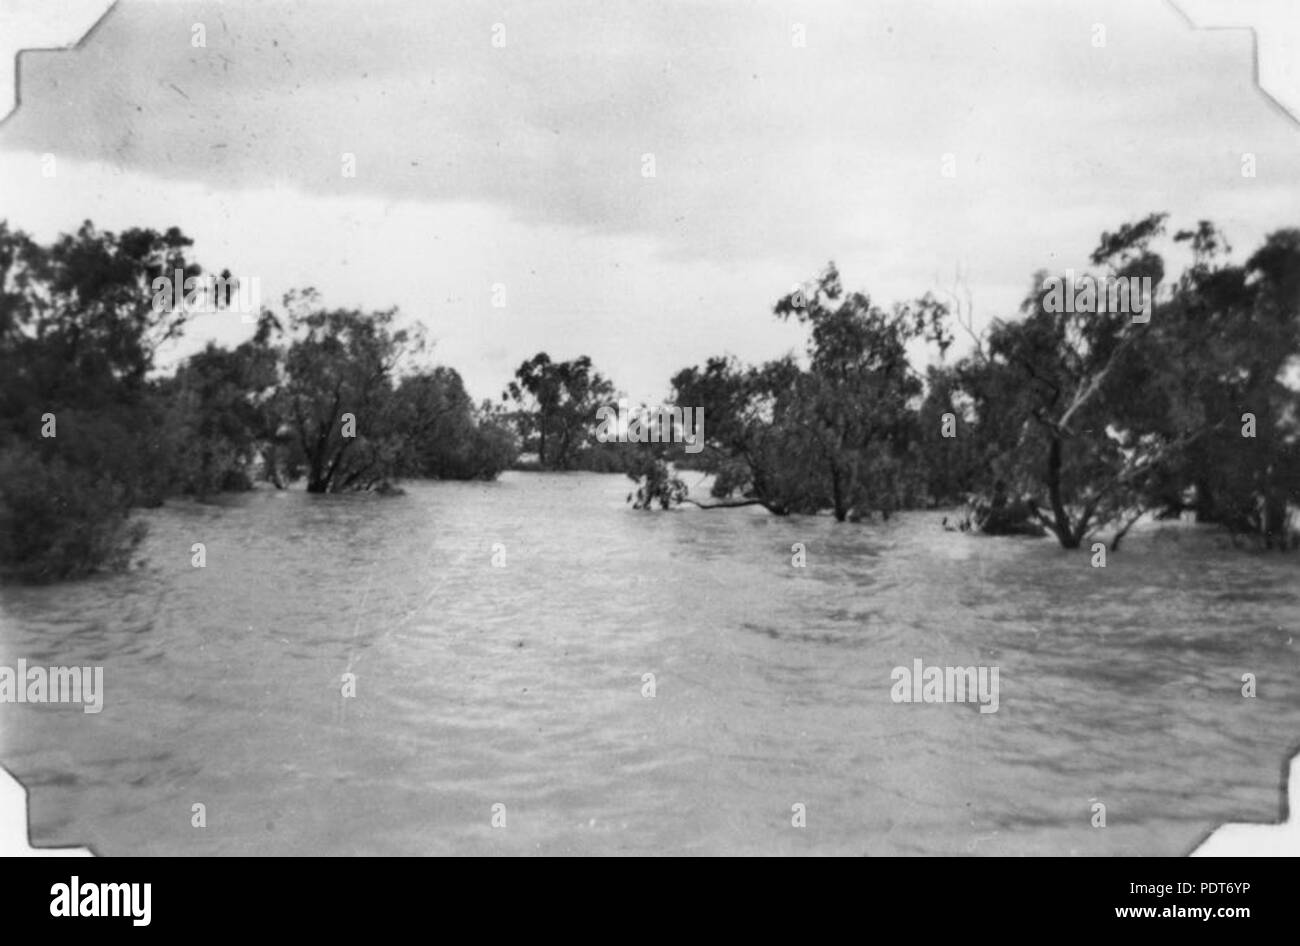 237 StateLibQld 1 166519 Main channel of the Thomson River in the 1950s flood, Jundah district Stock Photo